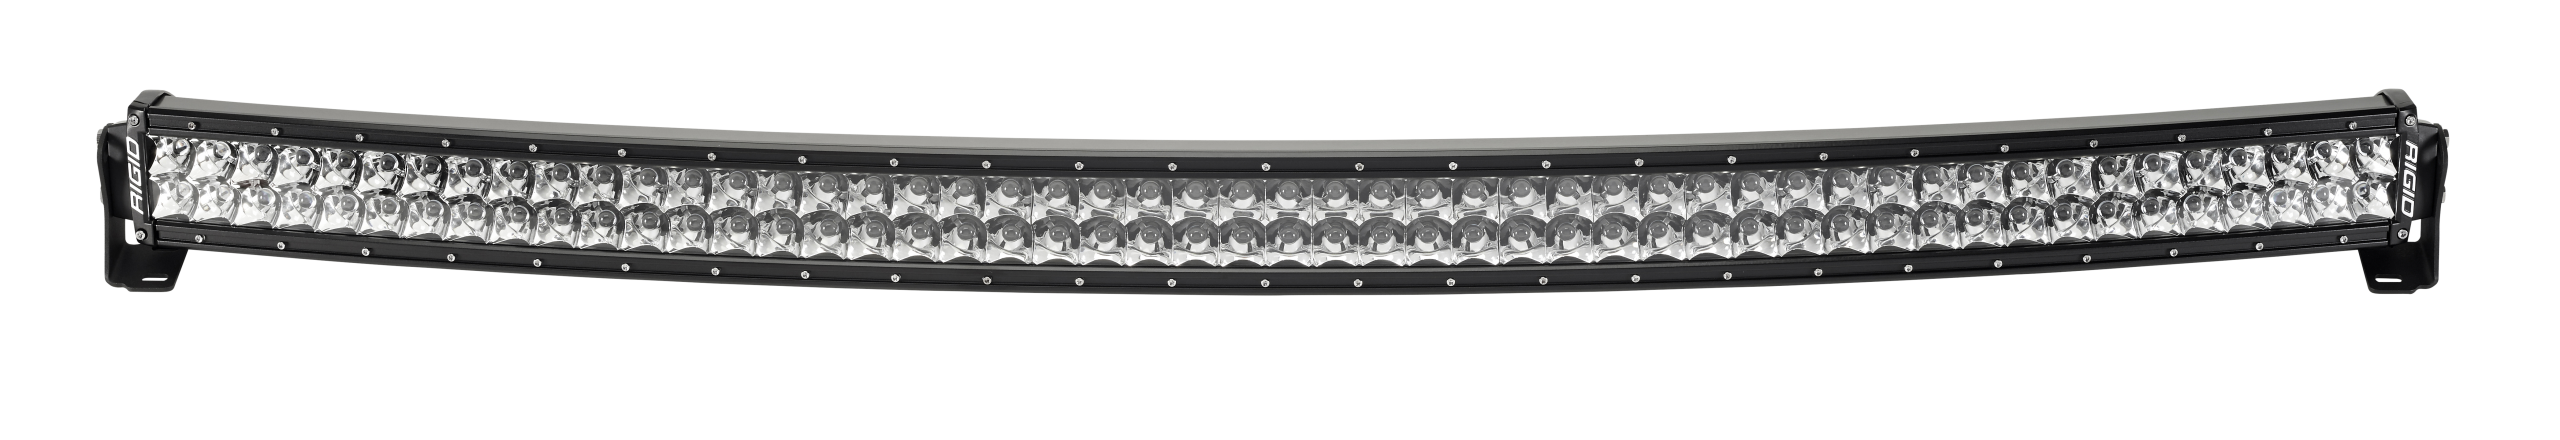 Rigid Industries 54 Inch Spot RDS-Series Pro - Click Image to Close